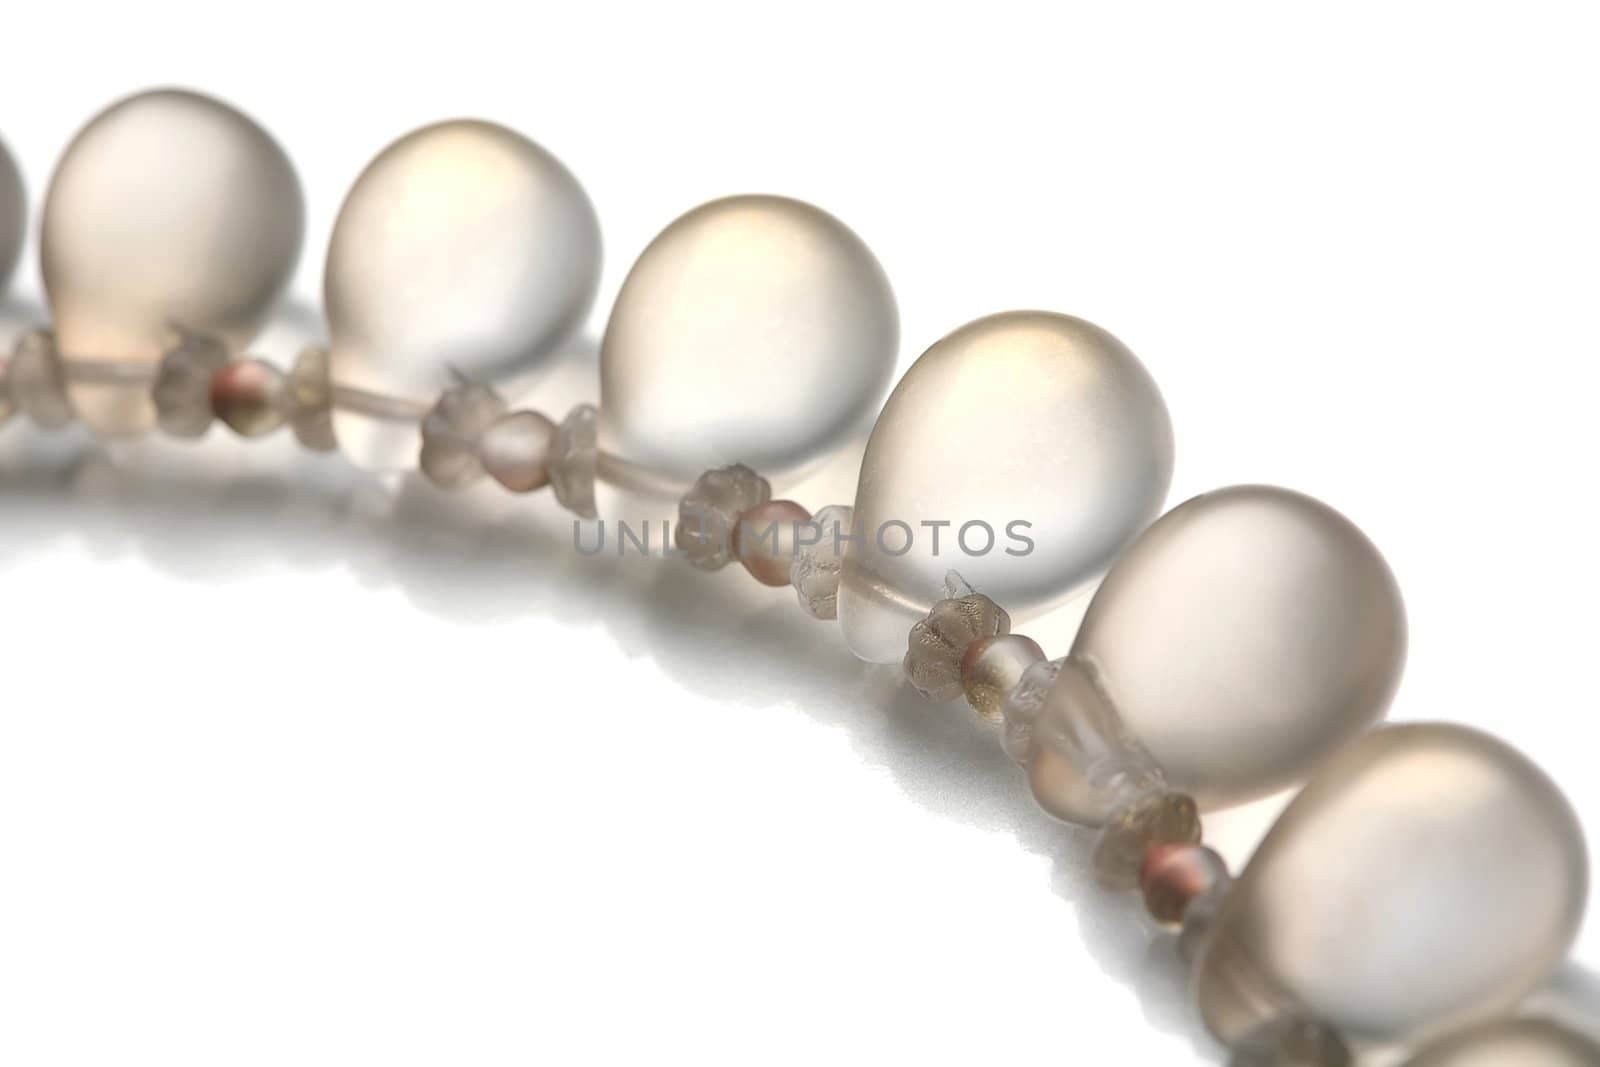 Fragment of the luxurious necklace, translucent beads to look like dripped